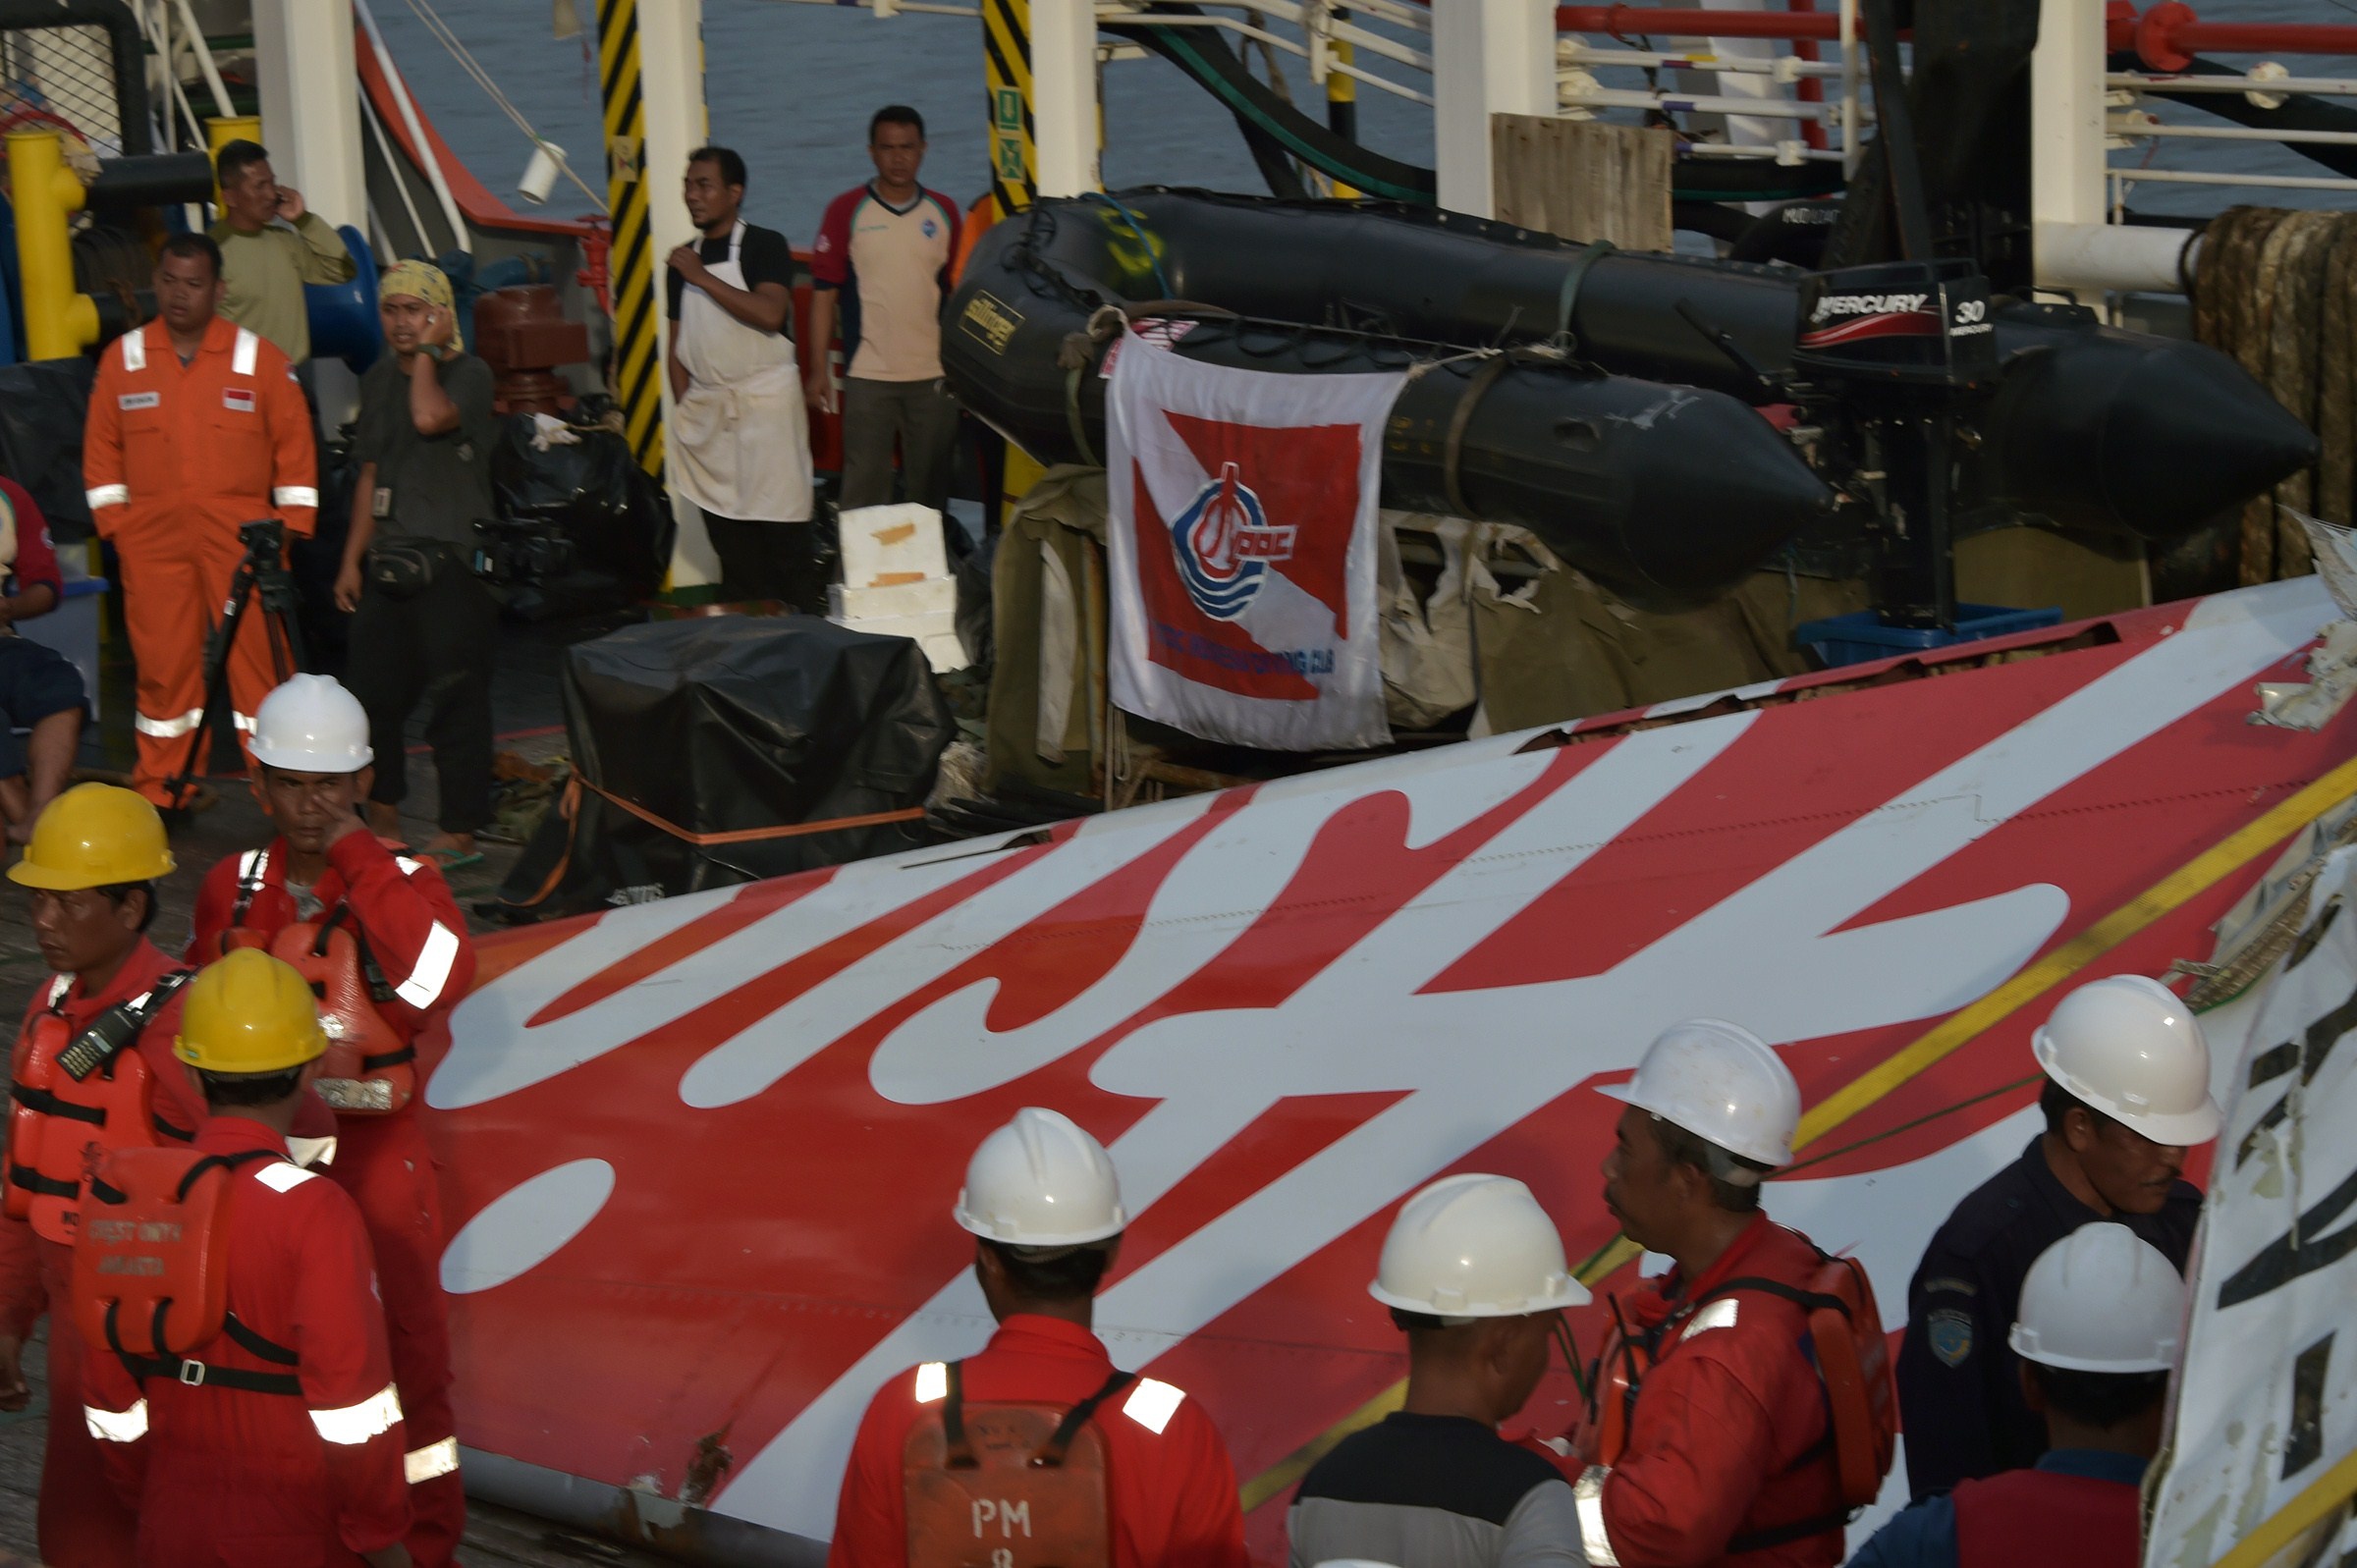 Indonesian crew of the Crest Onyx ship prepare to hoist recovered wreckage of AirAsia flight QZ8501 at port in Kumai on January 11, 2015. Indonesian divers on January 11 found the crucial black box flight recorder of the AirAsia plane that crashed in the Java Sea a fortnight ago with 162 people aboard, the transport ministry said. (Adek Berry—AFP/Getty Images)